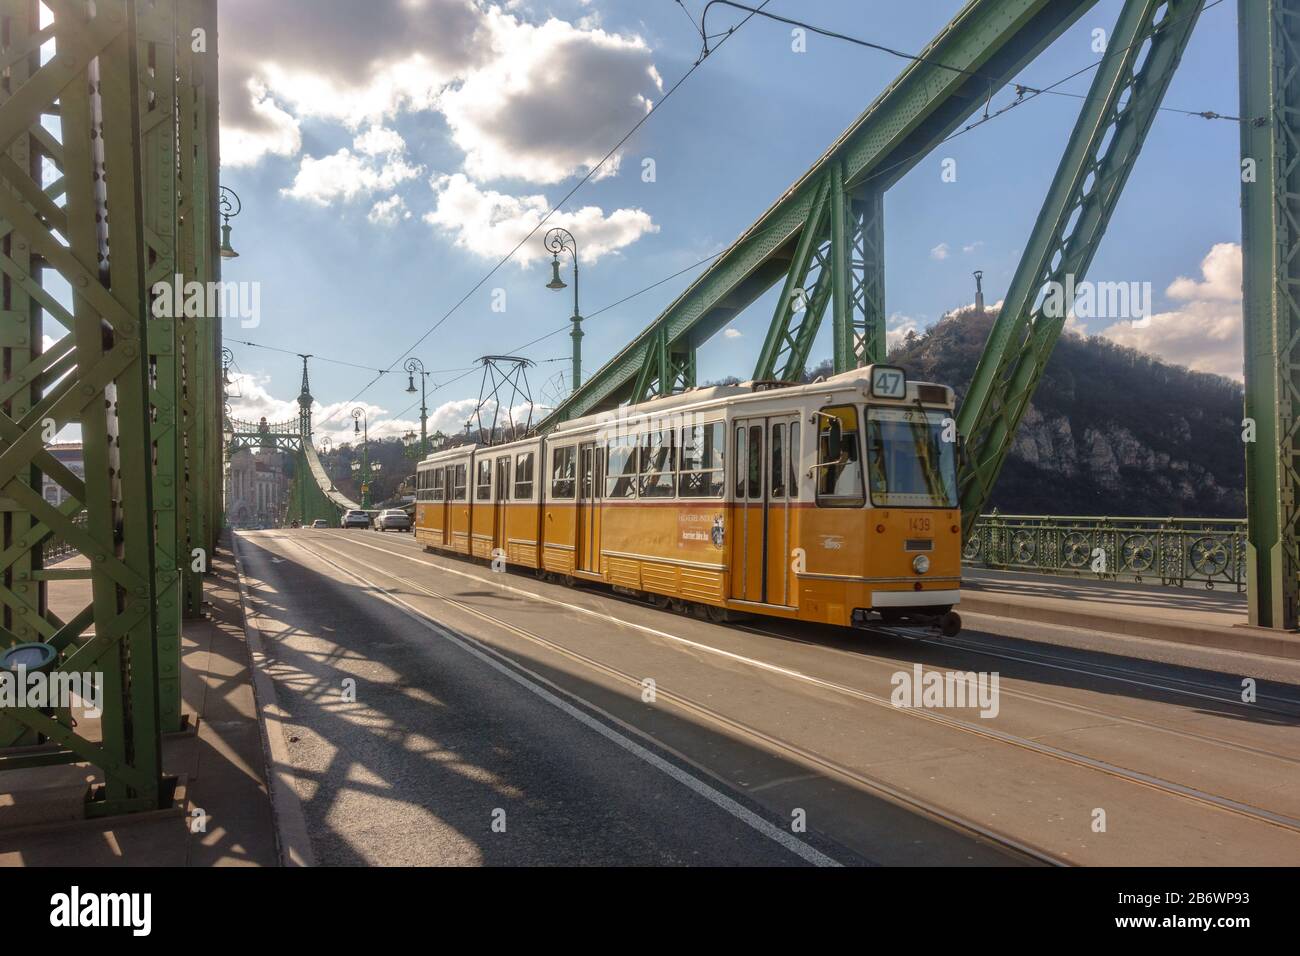 A Ganz CSMG tram on line 47 crossing the Liberty Bridge in Budapest, Hungary Stock Photo